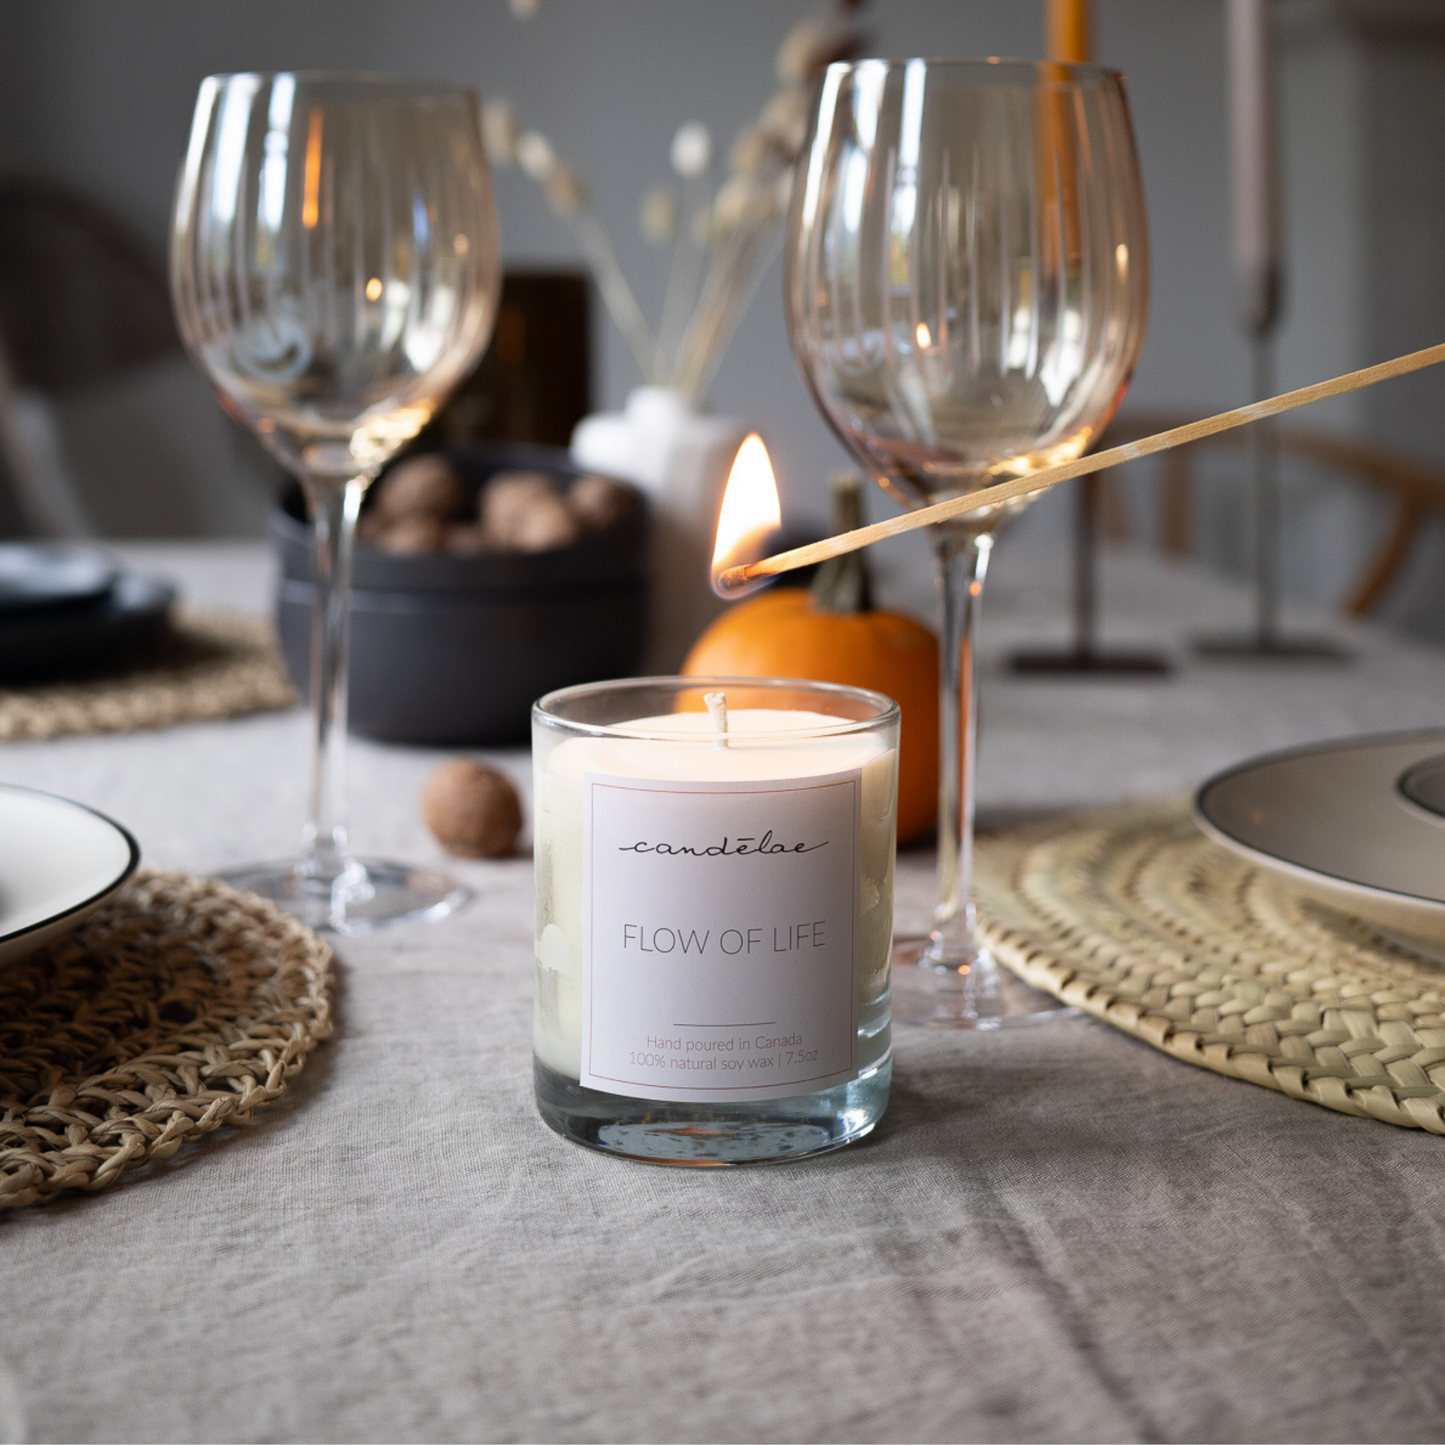 This scented soy wax candle from candēlae is at the center of the table for Christmas